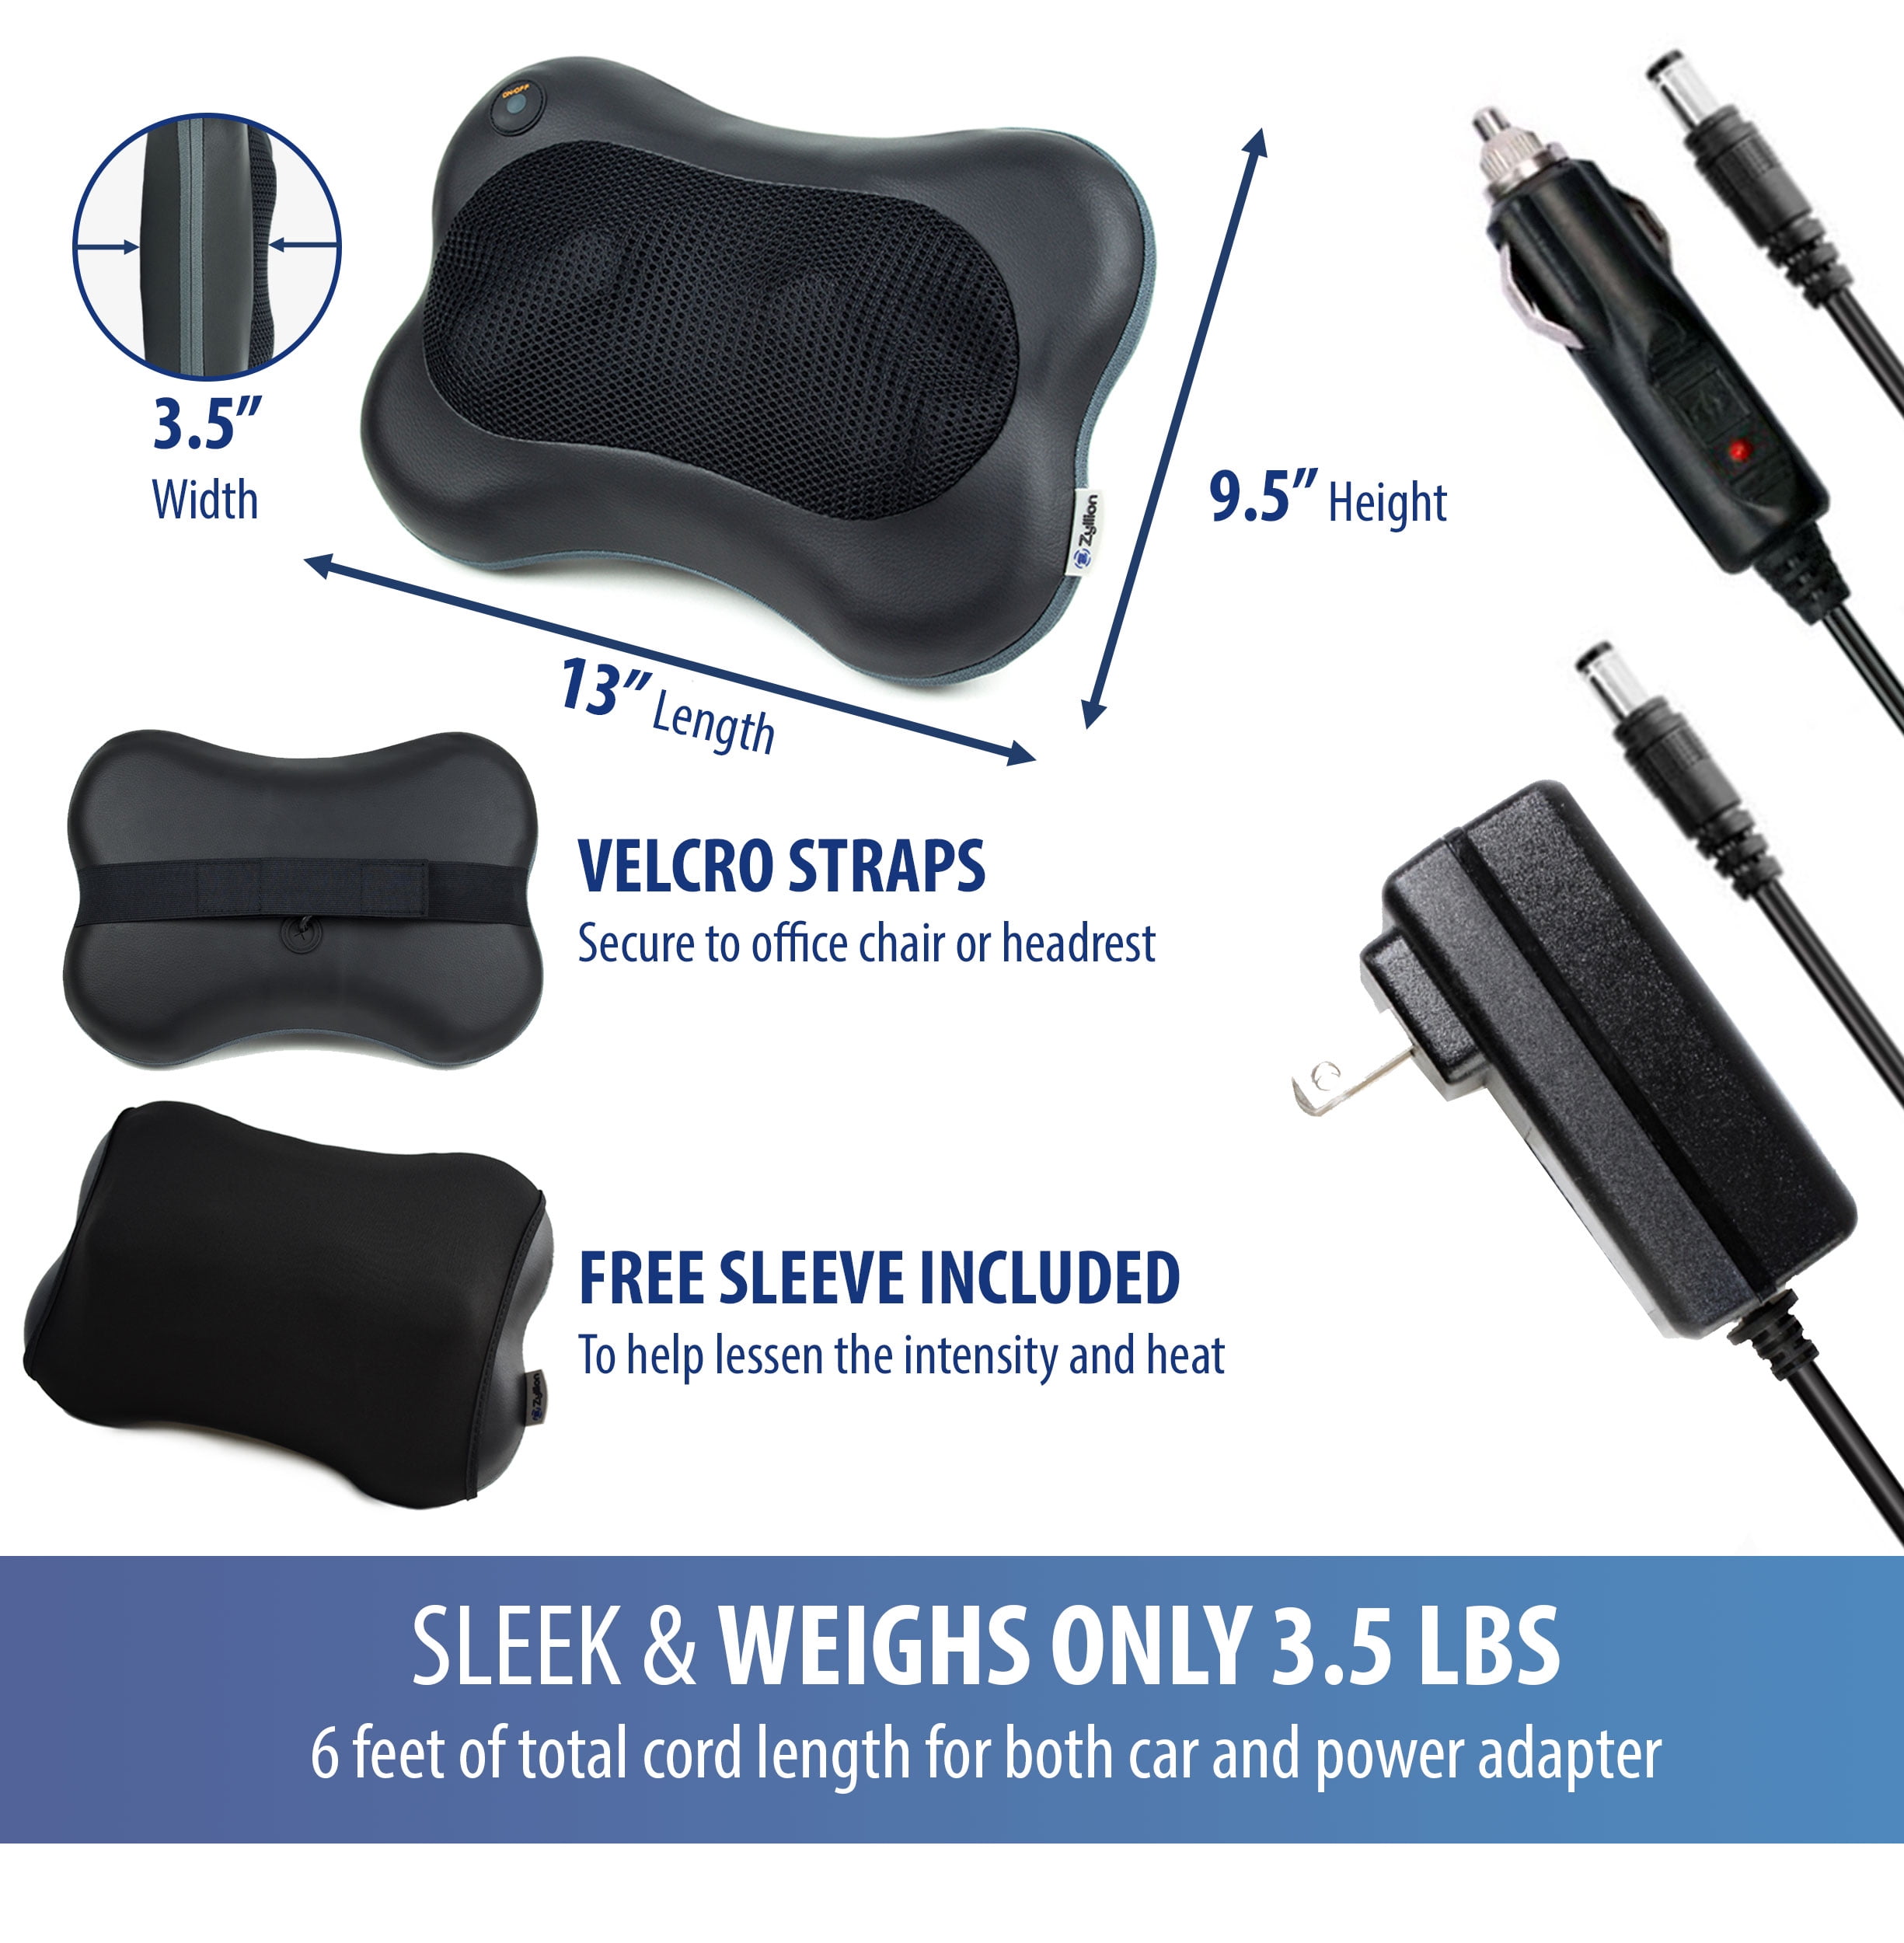 Jeeback Wireless Rechargeable Portable Neck Massager – Digshop Global Store